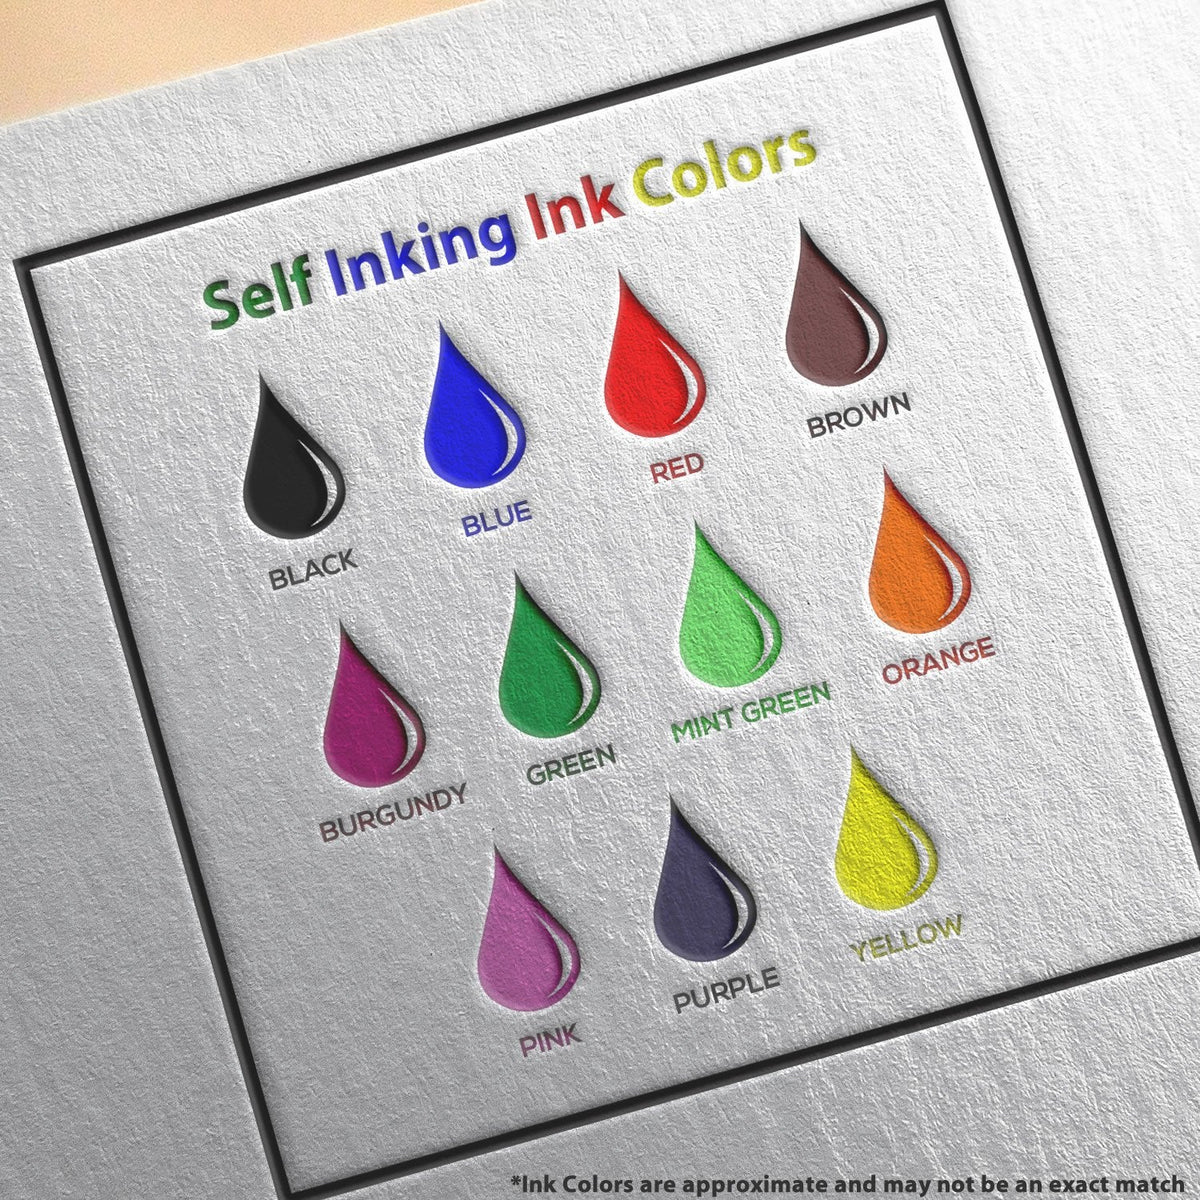 Self-Inking Round Kiss Stamp Ink Color Options